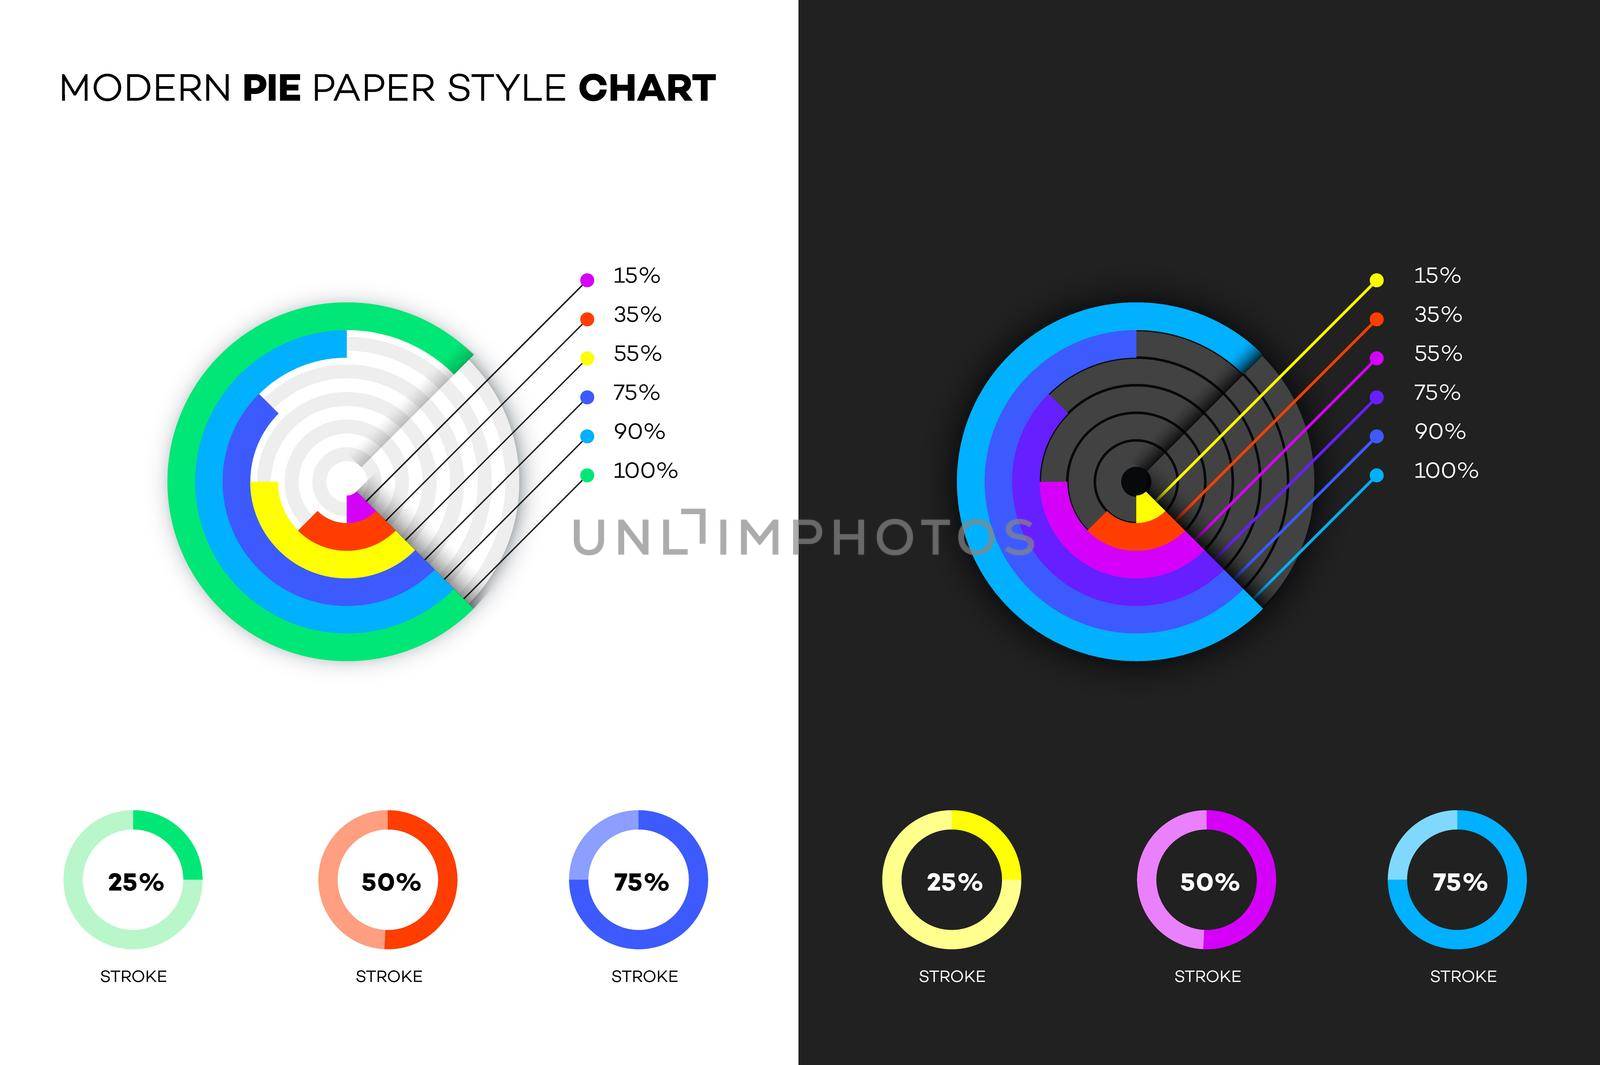 Modern Paper Style Pie Chart. Vector Template And Mockup For Your Business Brochure, Infogrphics Or Presentation Design.